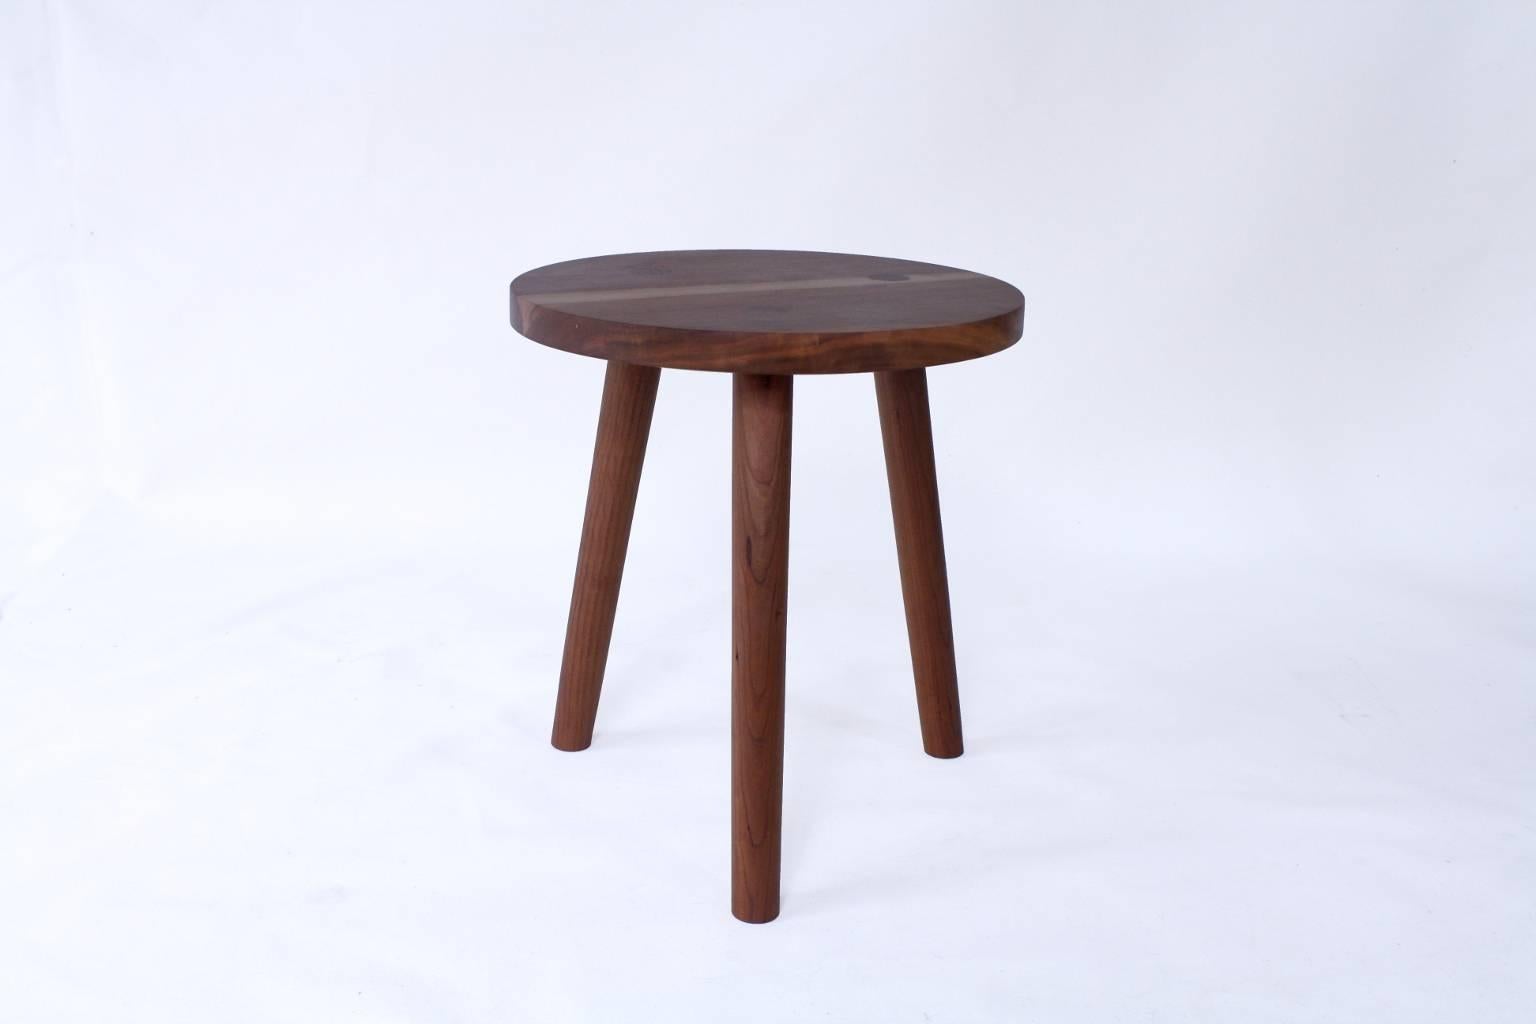 Handmade in Chicago by Laylo Studio, this solid hardwood stool or side table features hand-turned, tapered legs joined to the seat using through wedged tapered tenons, a construction technique found in traditional Windsor chairs. The hand-shaped,